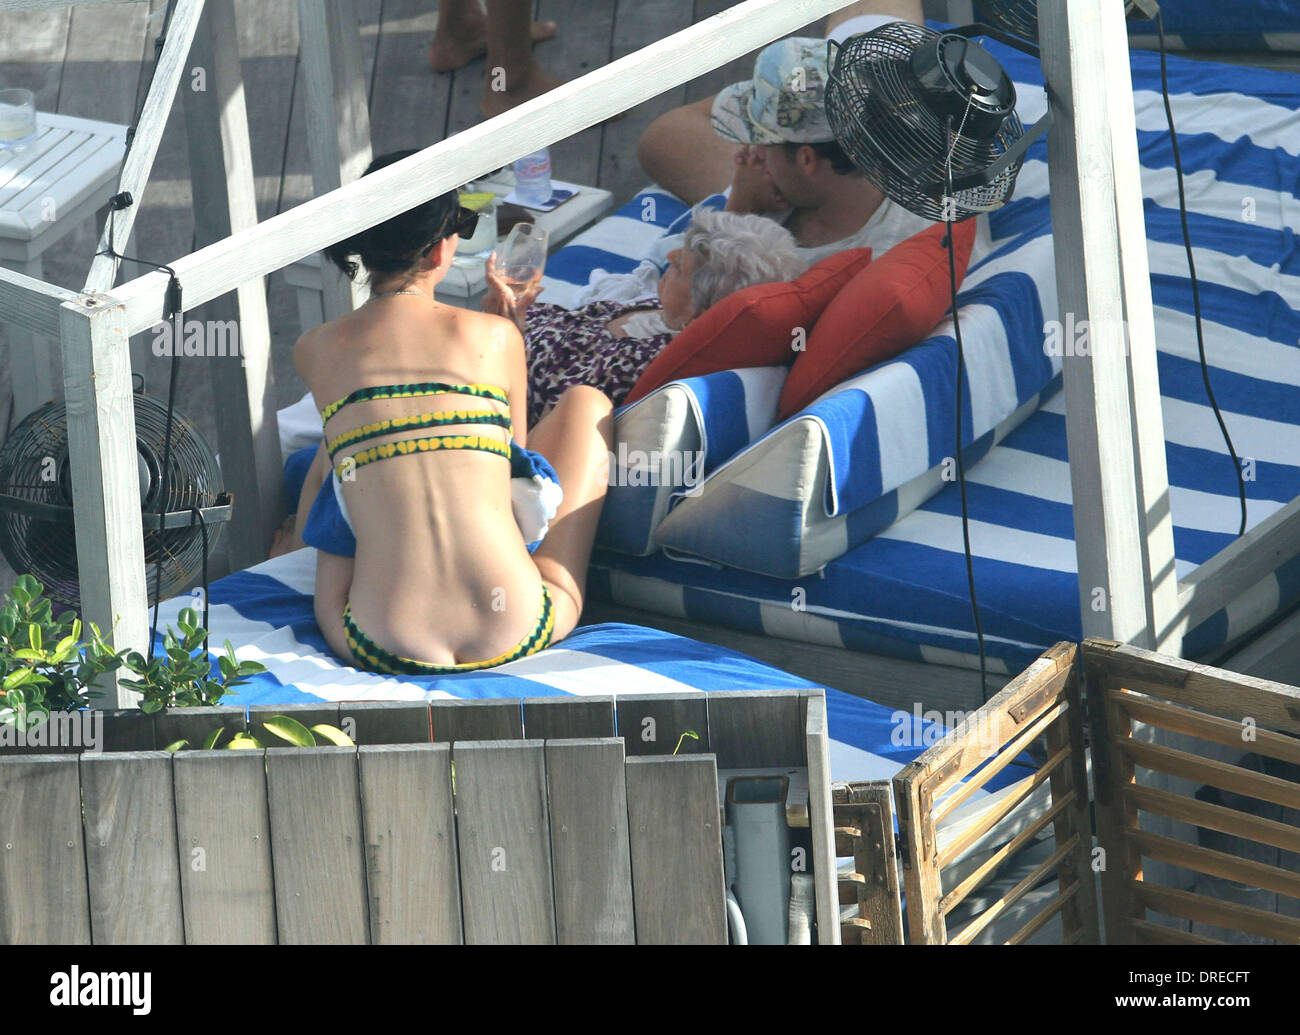 Katy Perry shows off her figure in a green bikini during a break with  friends and family Miami Beach, Florida - 27.07.12 Stock Photo - Alamy